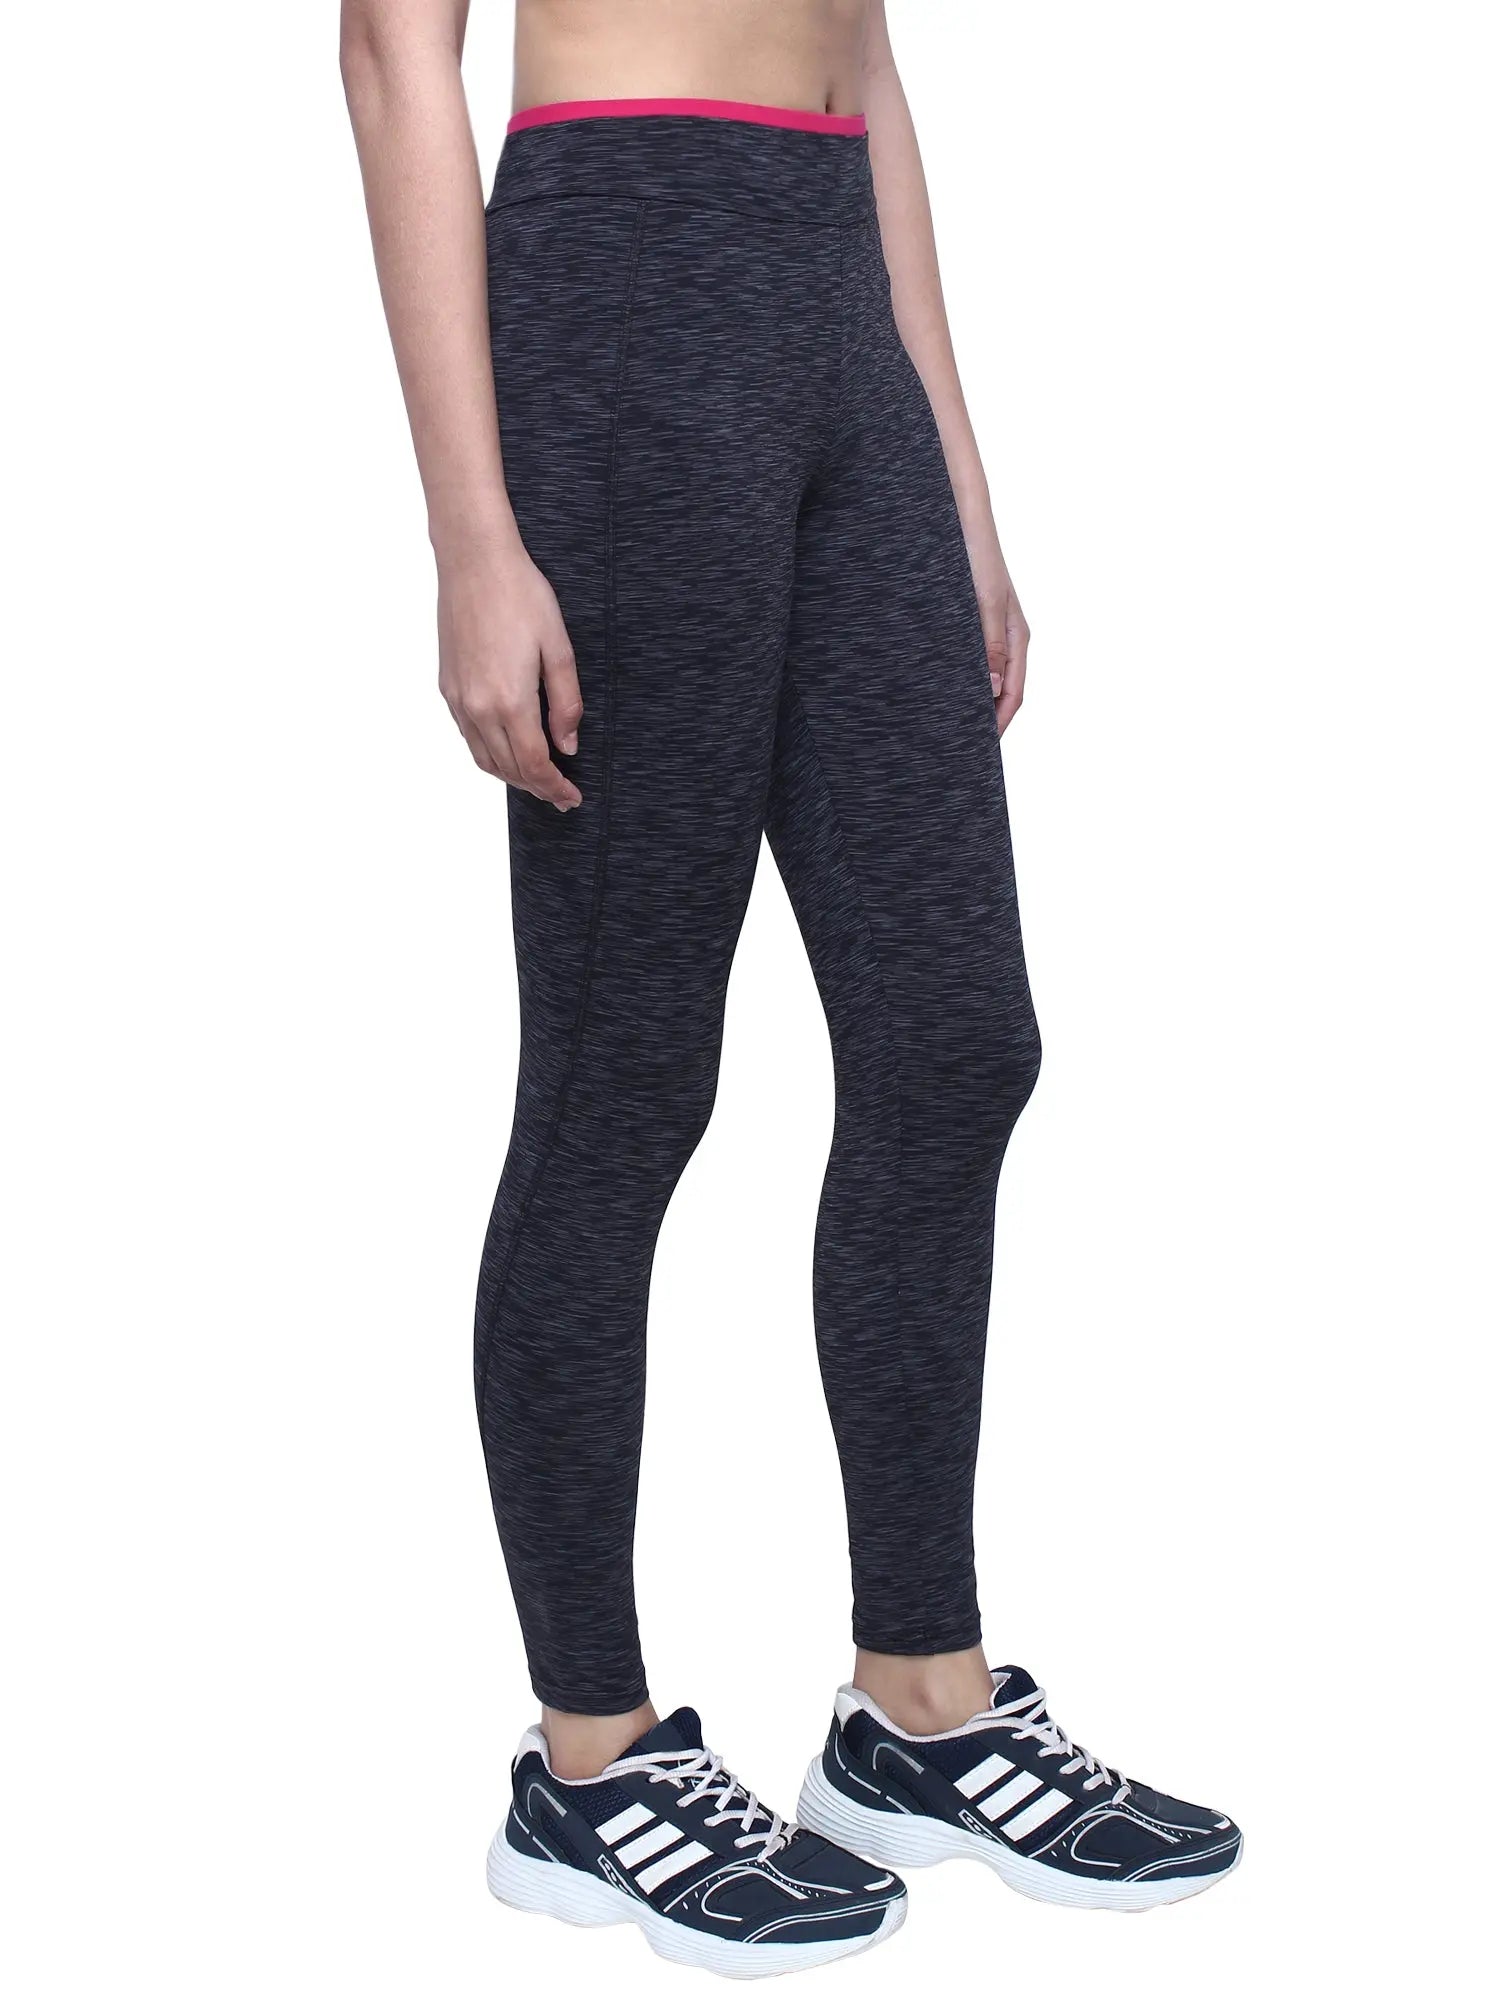 Lycra High Waist WOMEN STRETCHABLE YOGA PANTS, Solid, Slim Fit at Rs 295 in  Surat